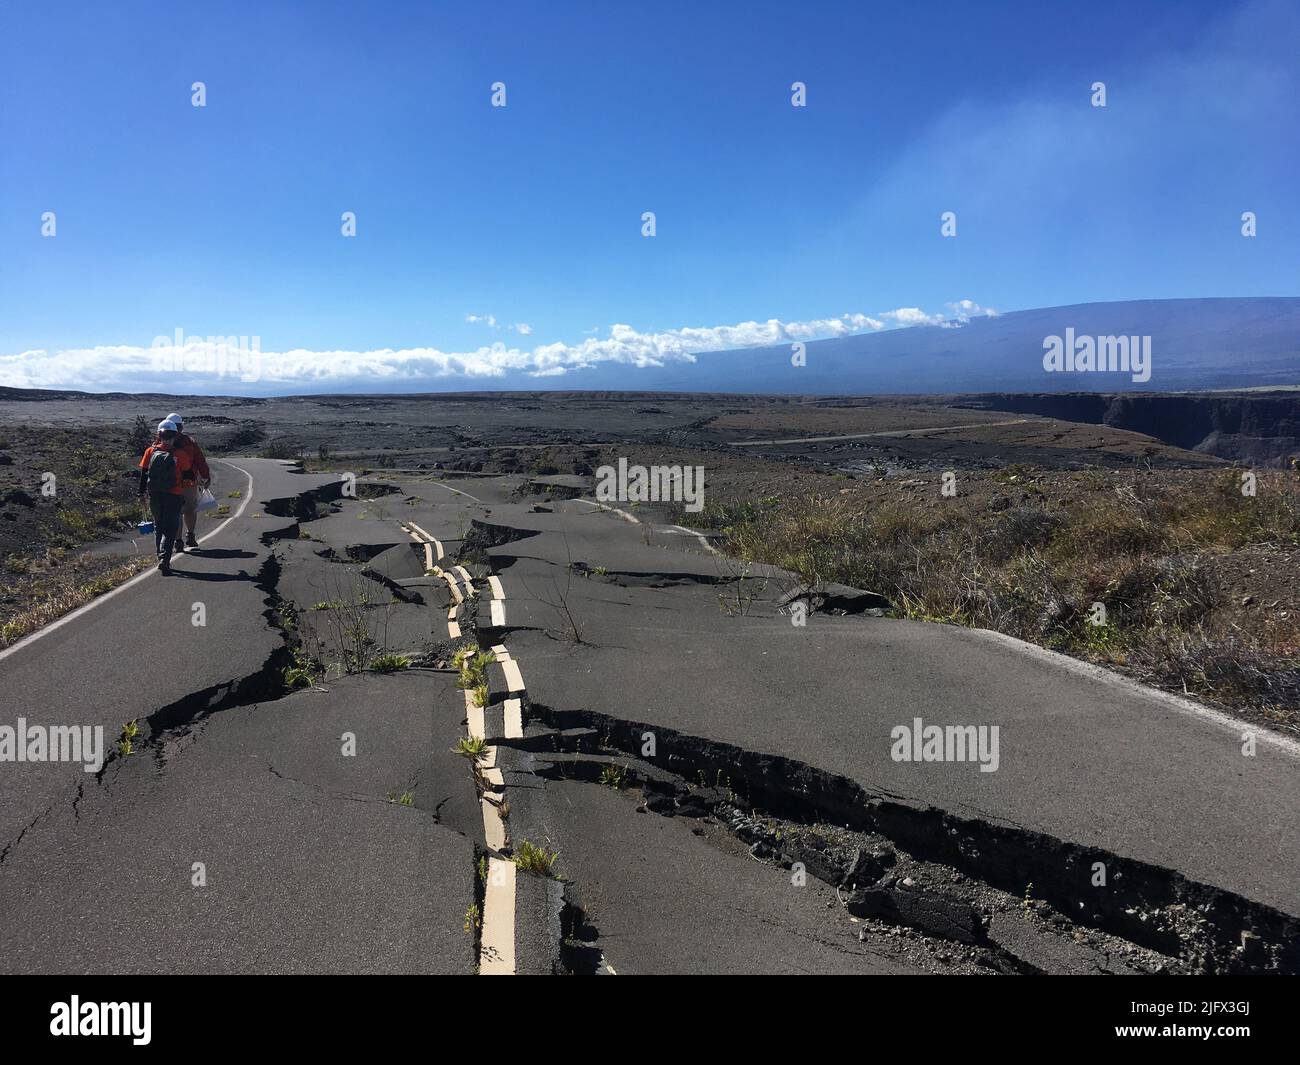 Volcanism  amage to roads.  In this photo, a US Geological Survey field crew hikes along a portion of Crater Rim Drive road, K?lauea, Hawaii. The road was damaged during the 2018 K?lauea summit collapse. Credit: P.Dotray/USG Stock Photo